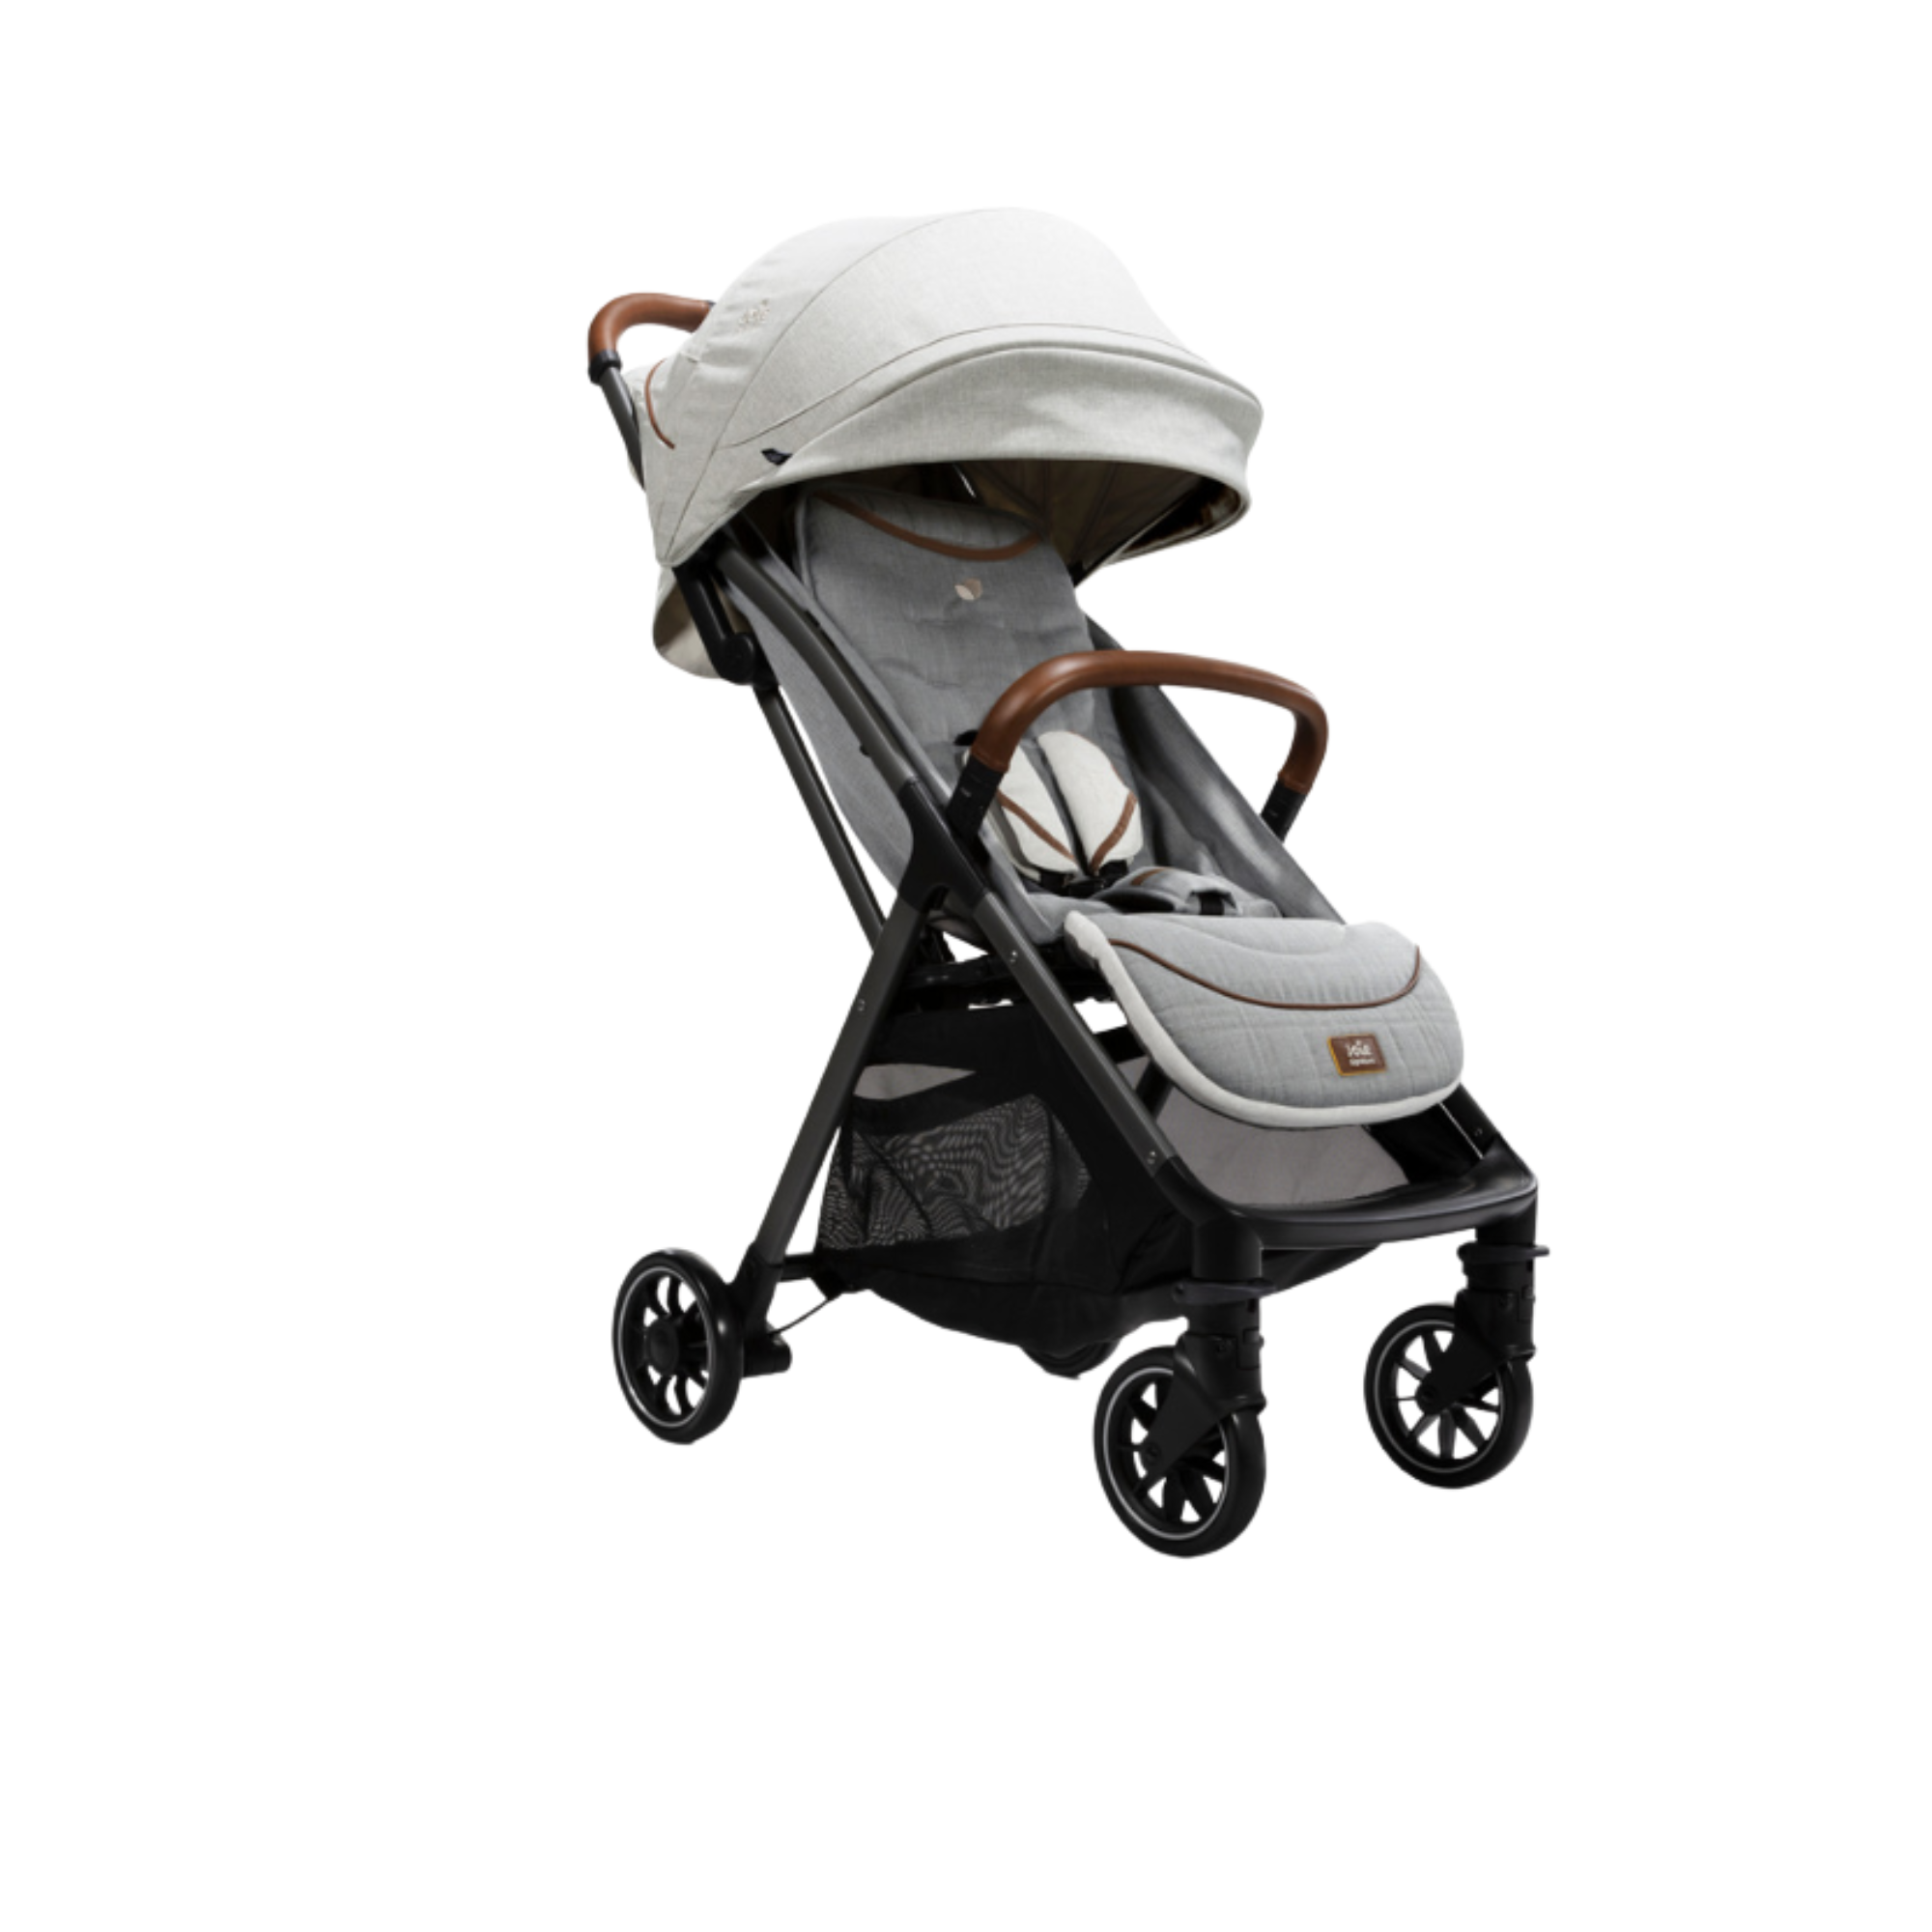 Carucior sport ultracompact Parcel, nastere - 22 kg, Signature Oyster, Joie 538987